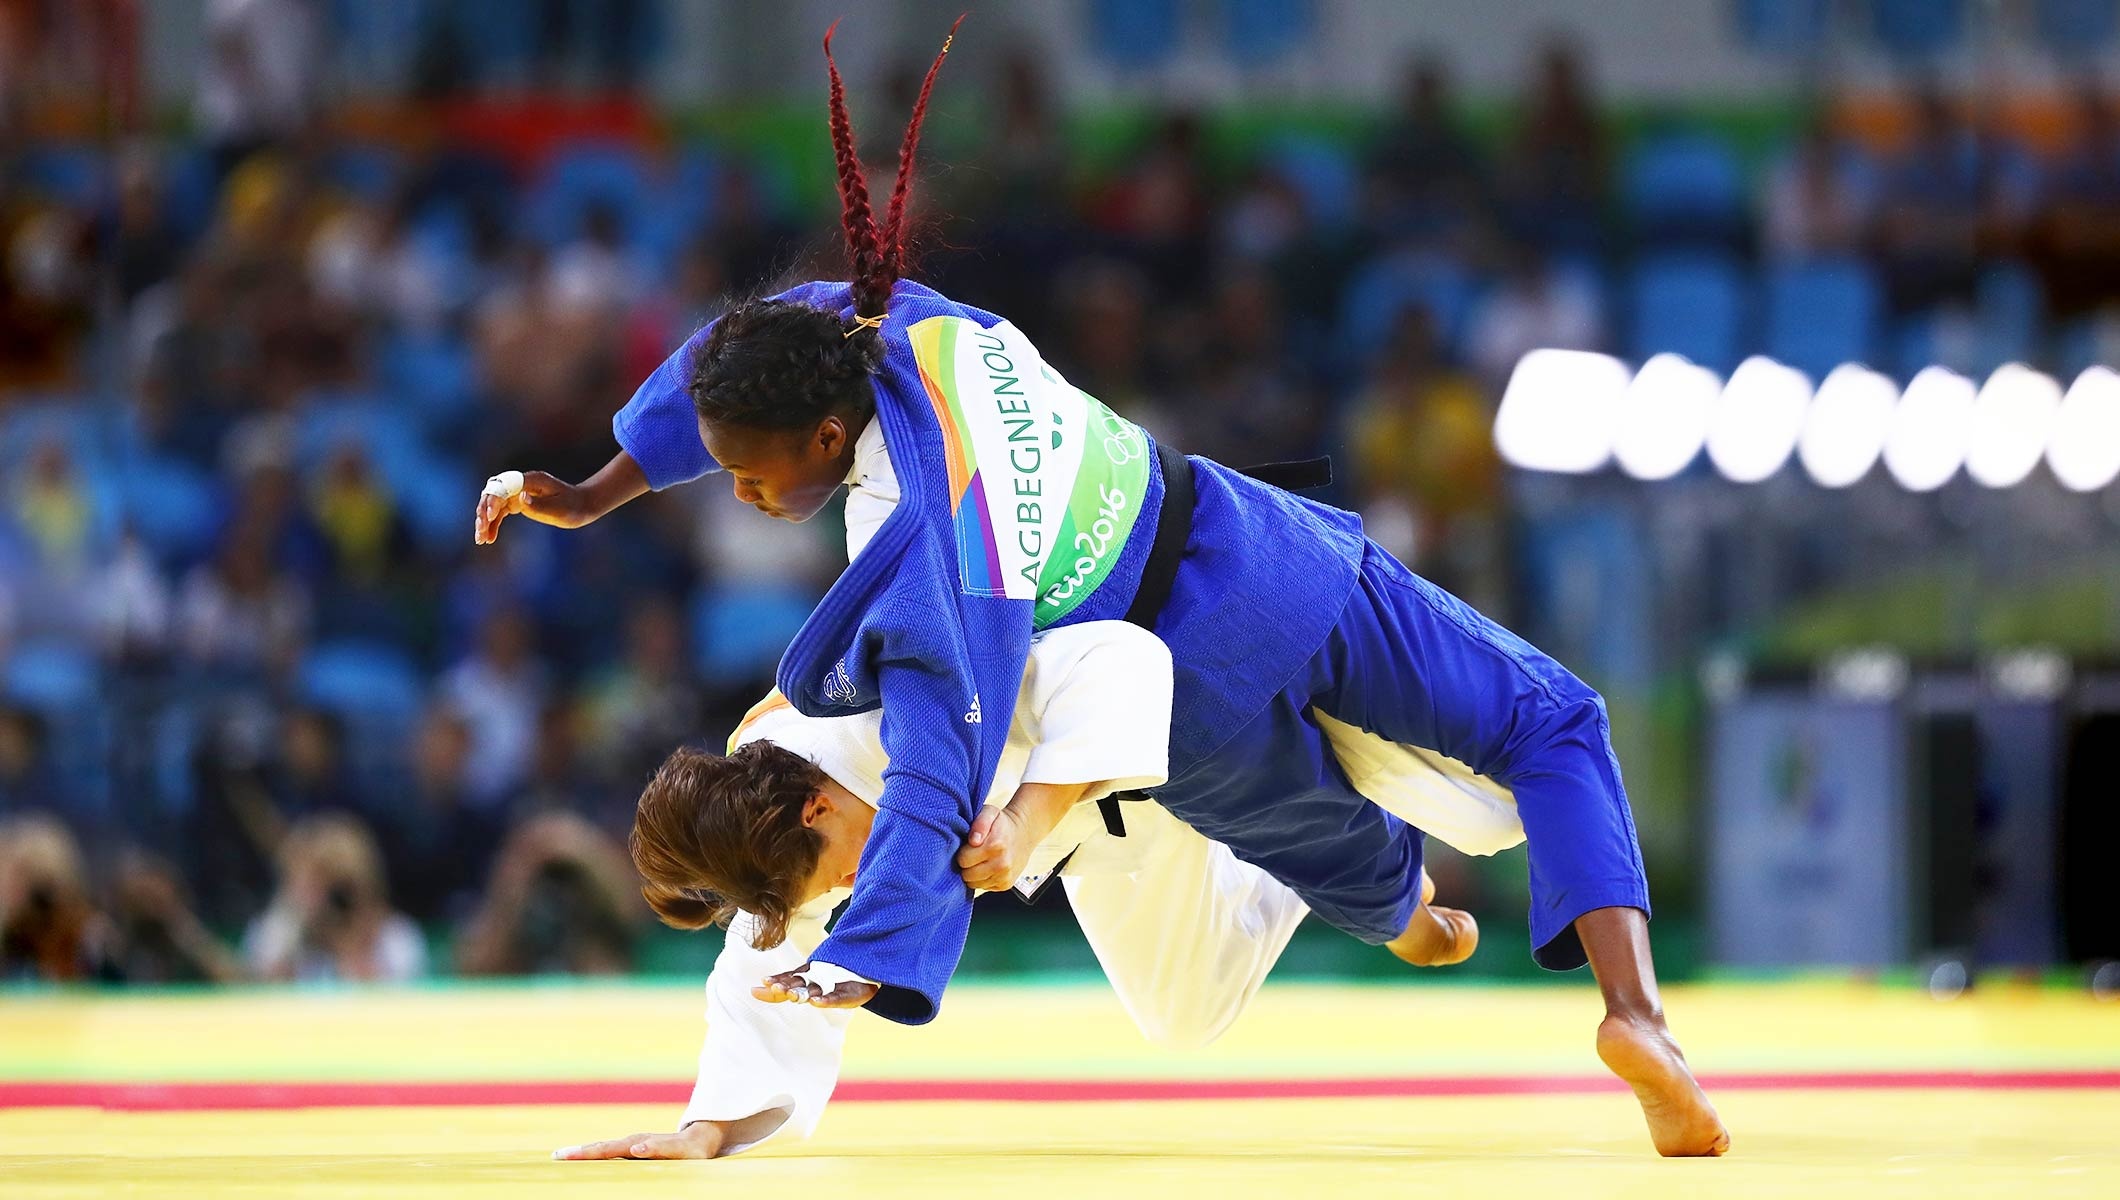 Judo: Clarisse Agbegnenou, A French judoka, The 2020 Summer Olympics gold medalist. 2120x1200 HD Wallpaper.